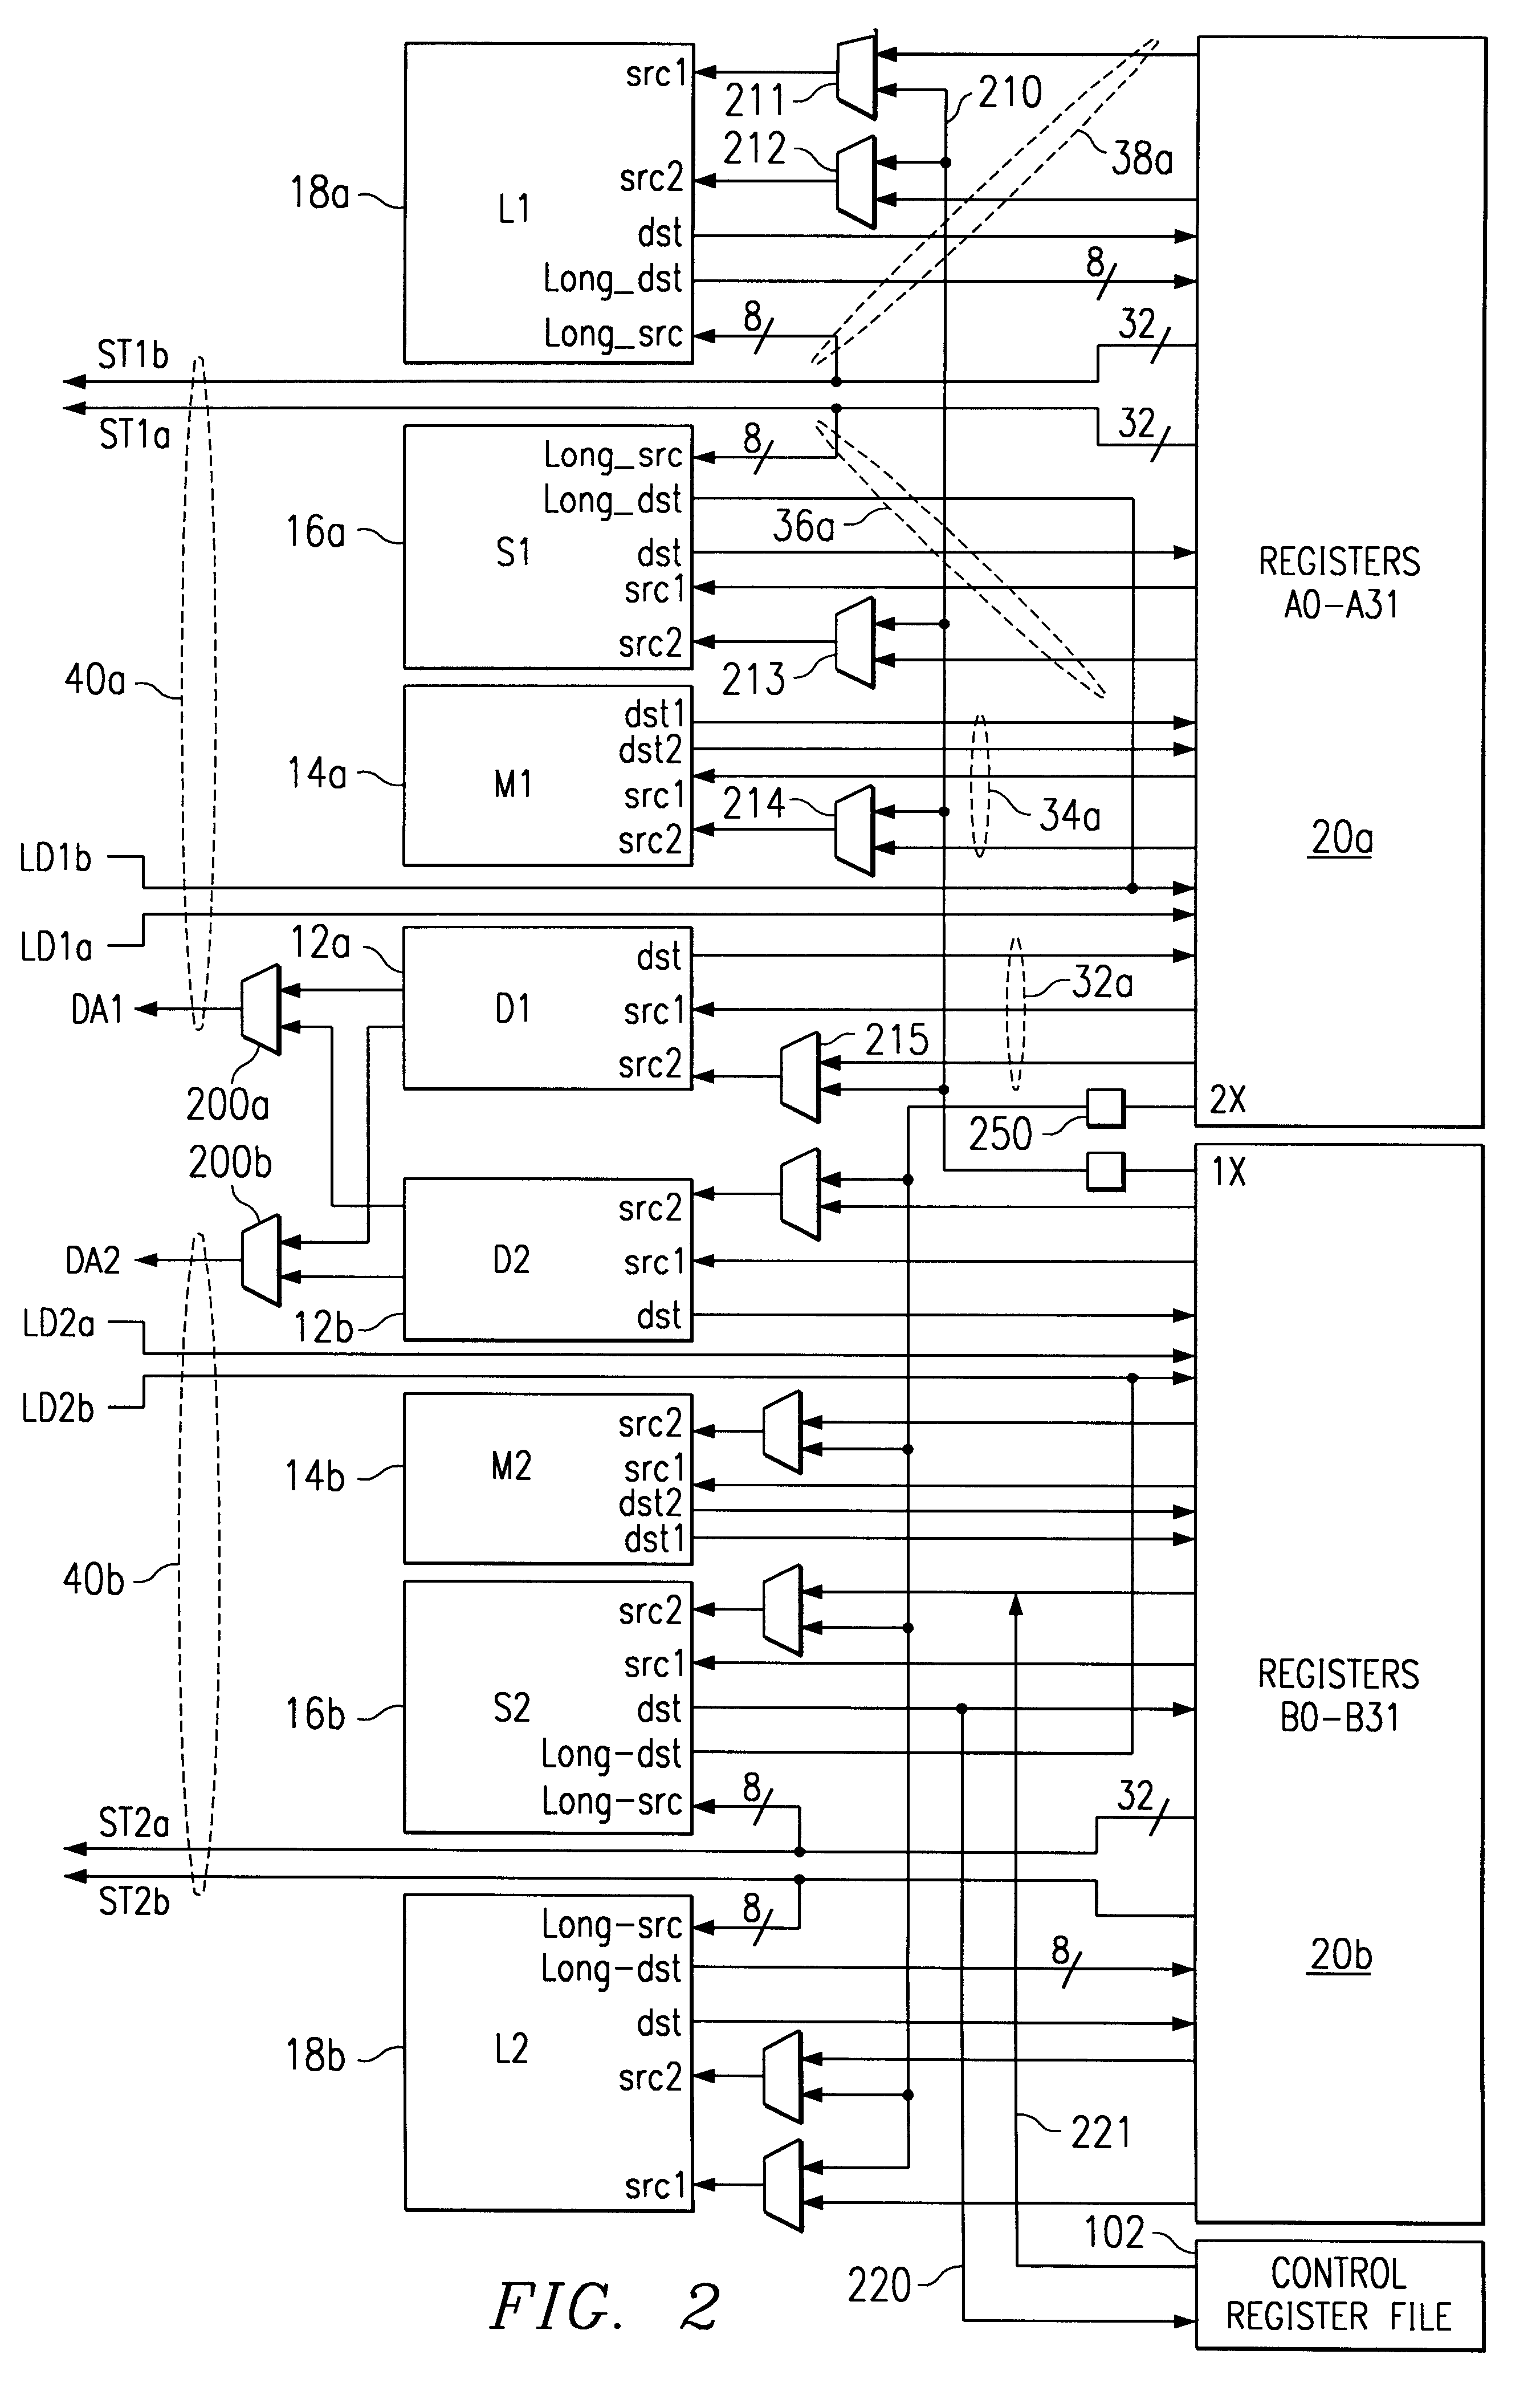 Microprocessor with non-aligned circular addressing